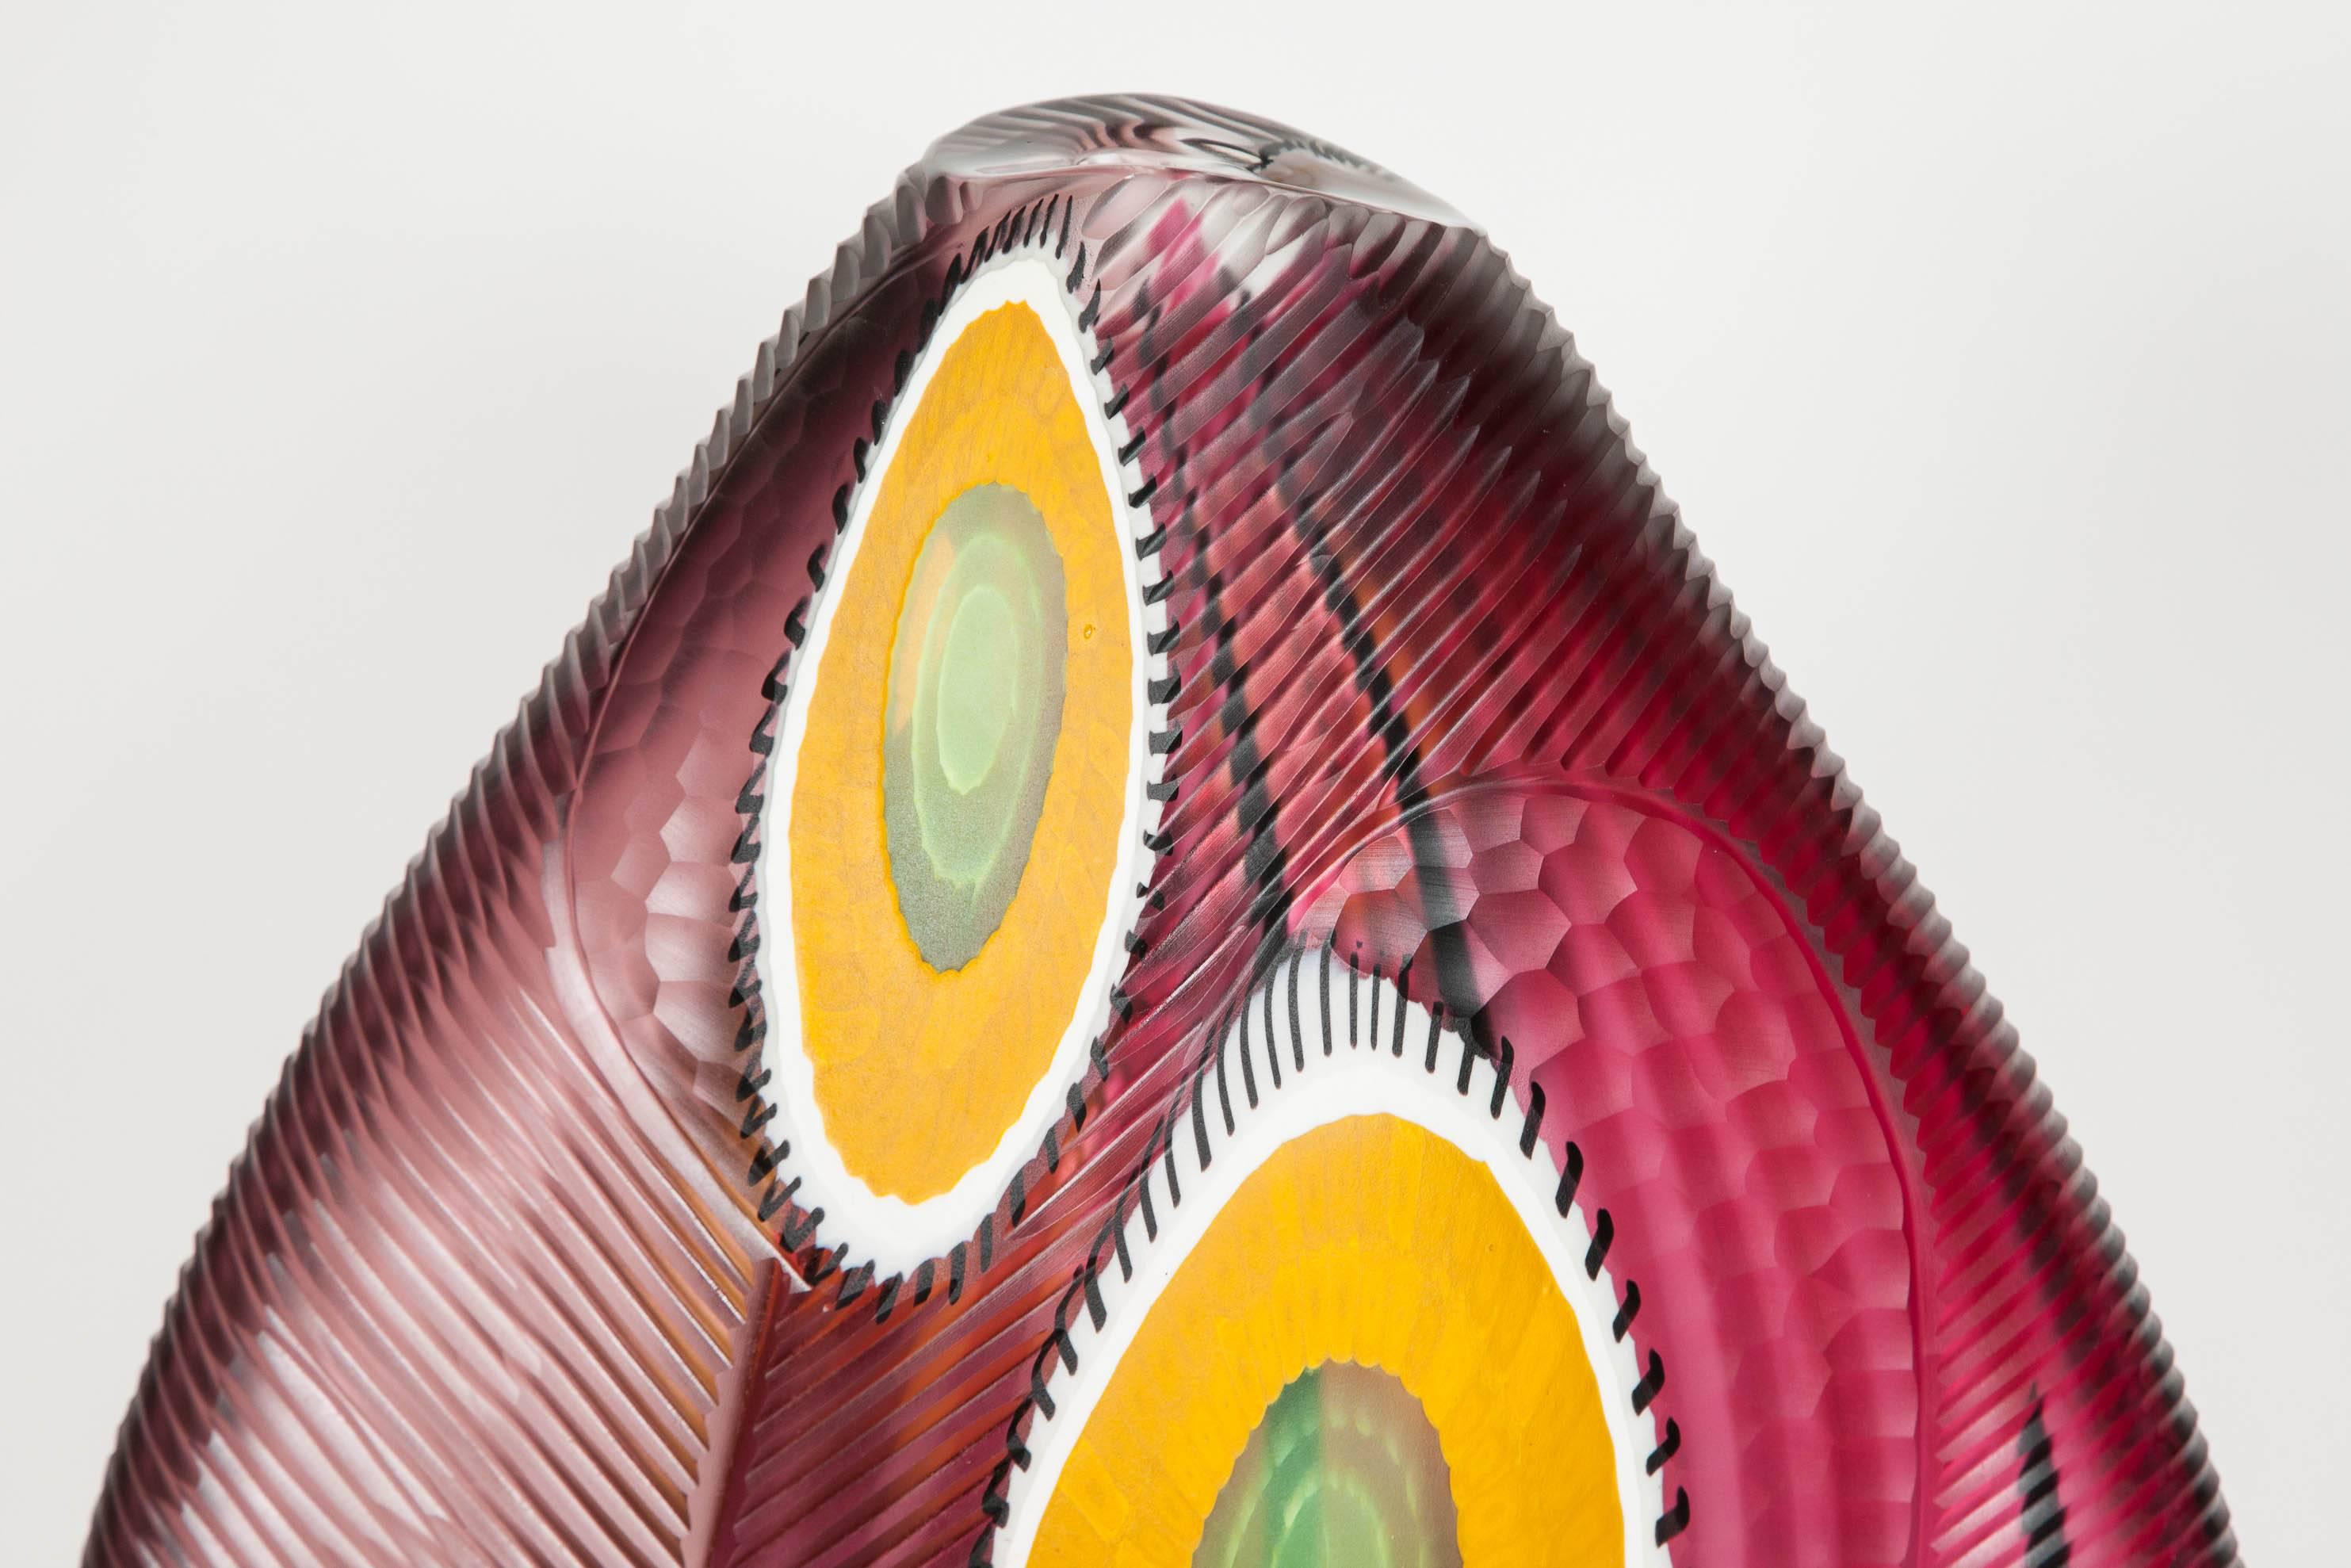 Eviva II is a contemporary handblown, sculpted and 'batutuo' cut glass vase and statement artwork by the Italian artists and brothers, Marco and Mattia Salvadore.

Mattia and Marco Salvadore began working alongside their father, Davide Salvadore, in